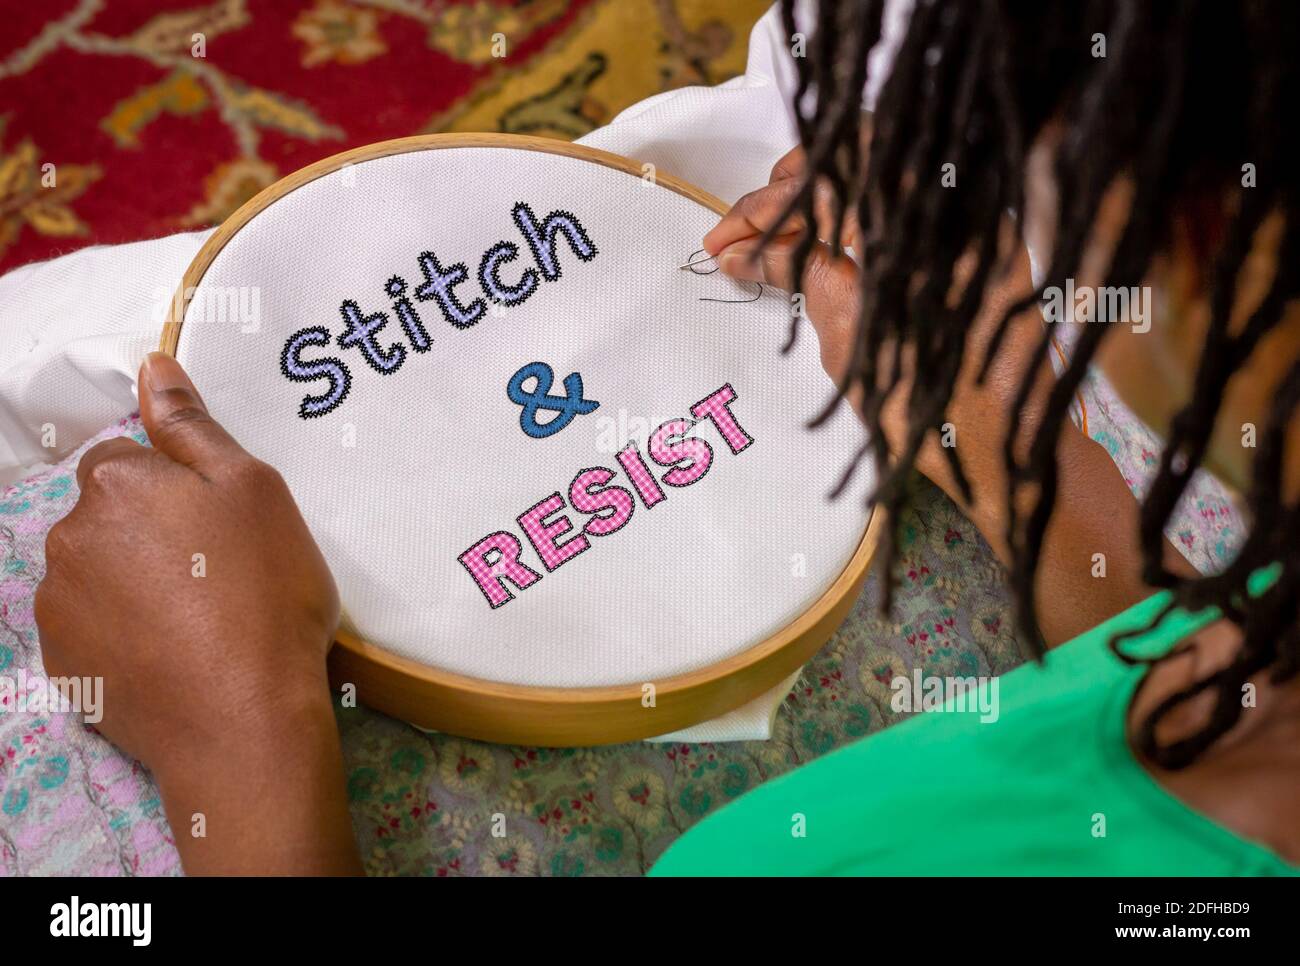 craft activism, woman sewing Stitch and Resist embroidery on hoop, craftivism ethnic feminist activism. Stock Photo